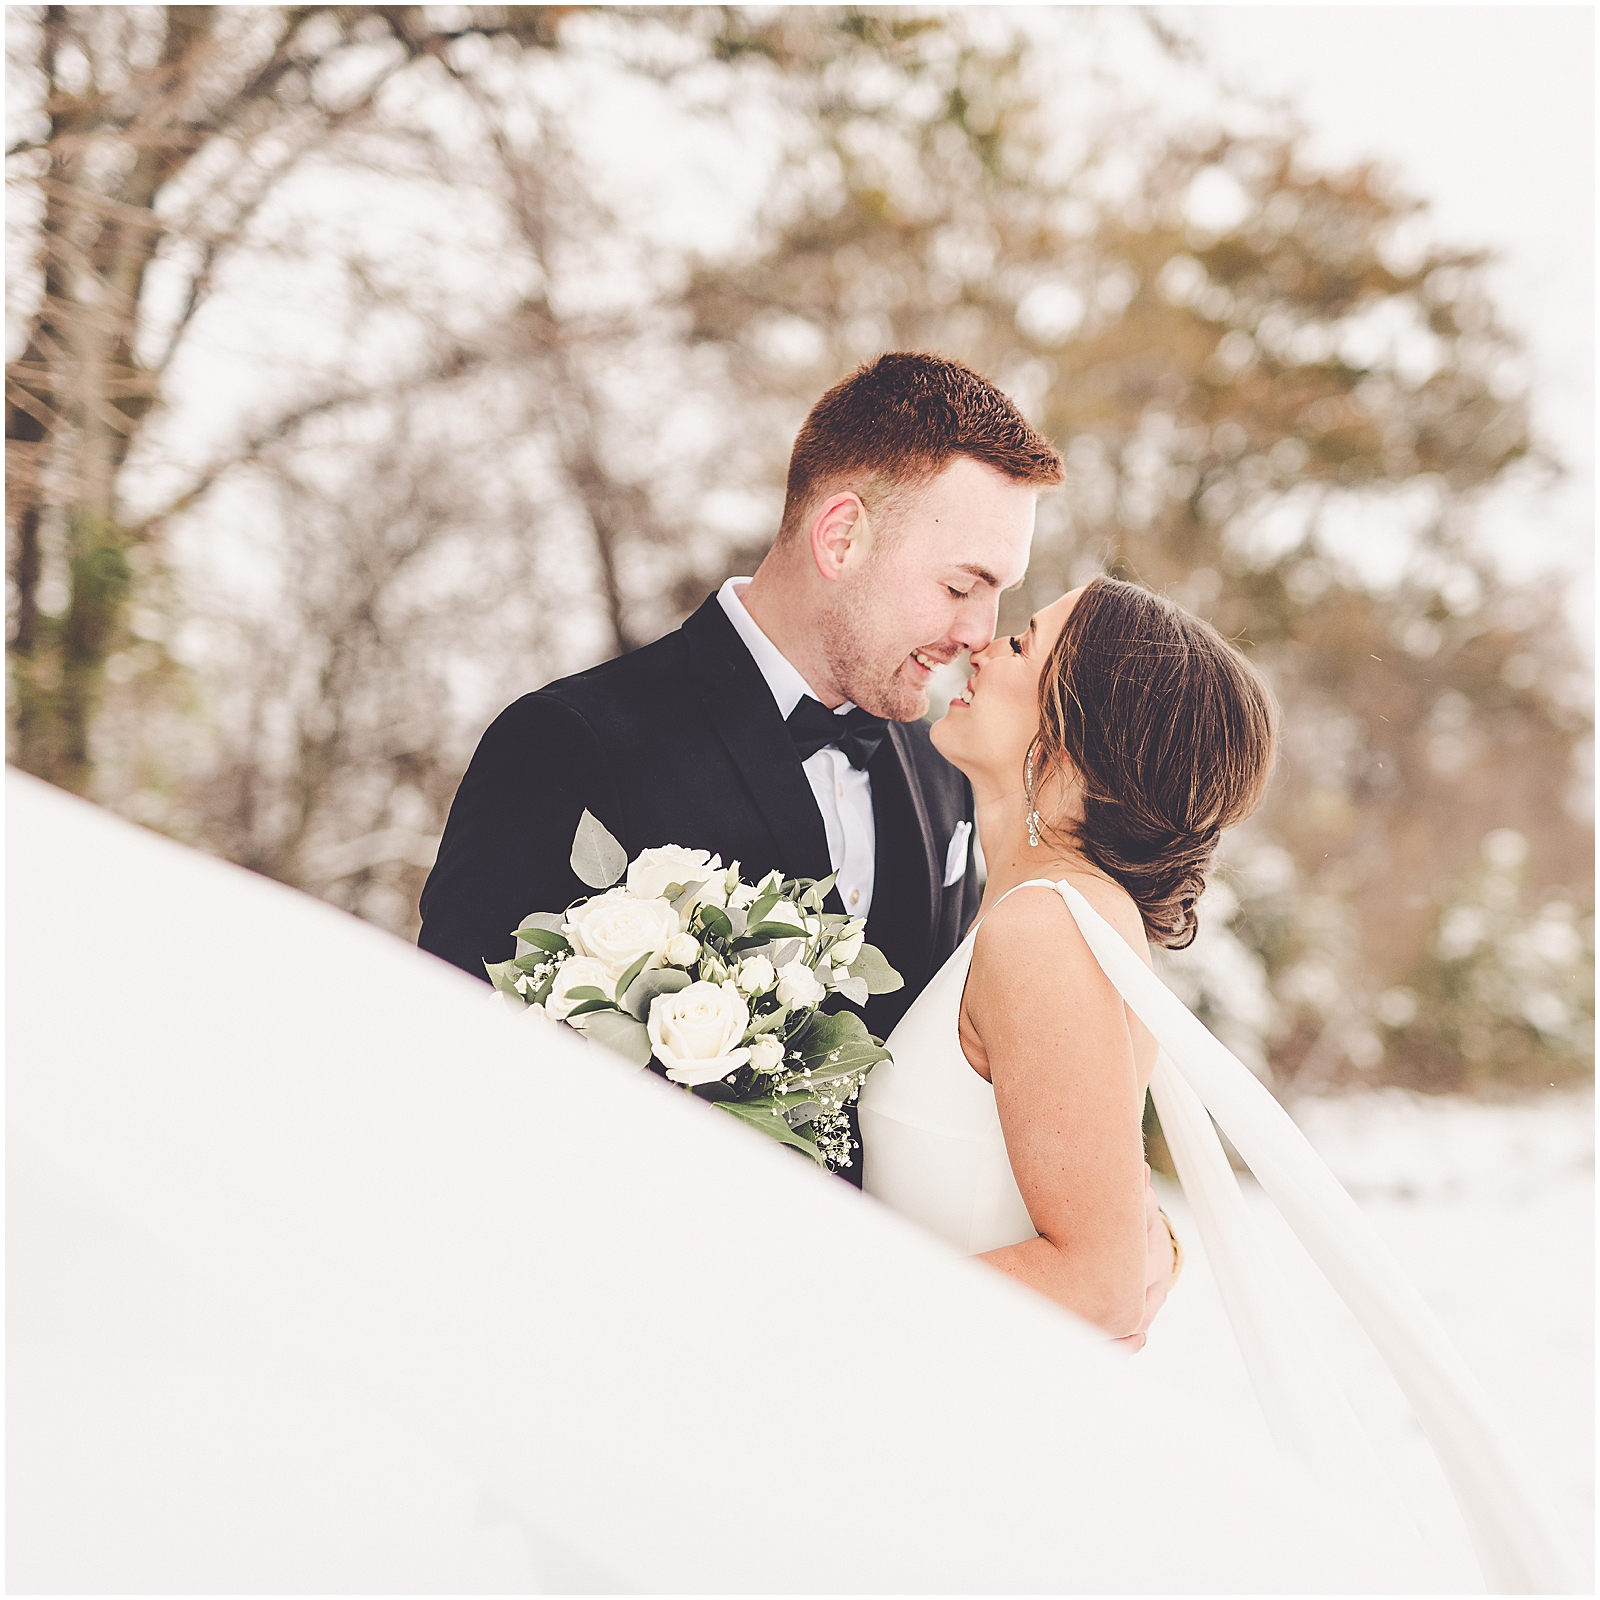 Kendall and Noah's snowy wedding day in St. Libory, Illinois with Chicagoland wedding photographer Kara Evans Photographer.